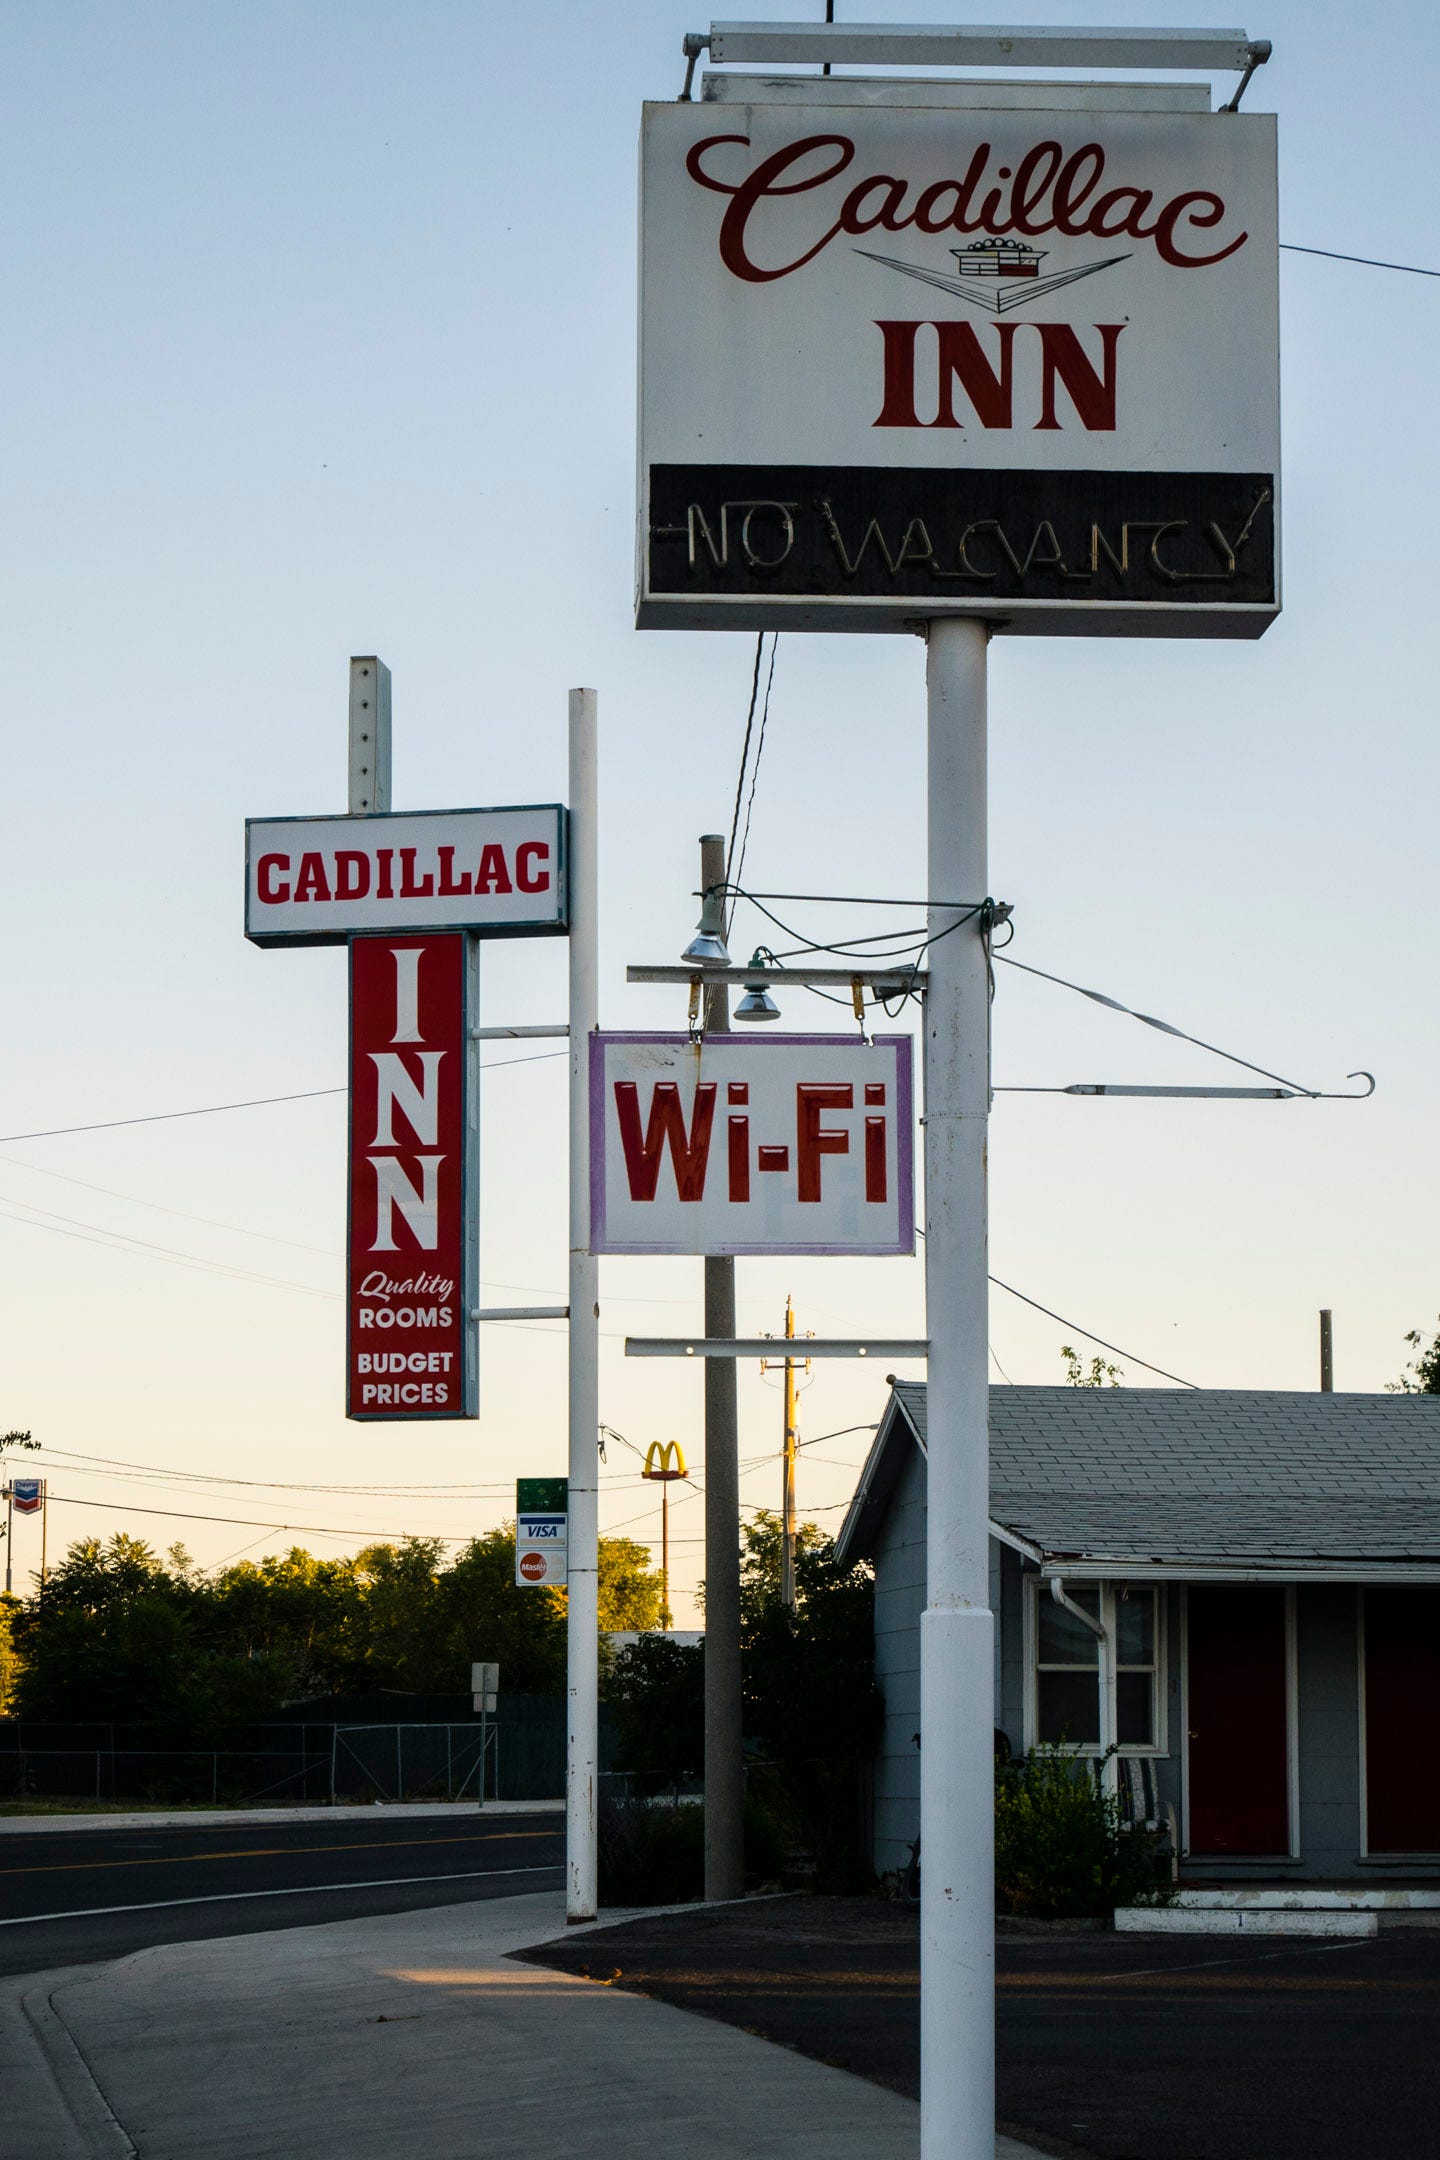 Photo of roadside signs on metal poles painted white at the entrance to a motel. The closest sign is white with "Cadillac Inn" in a dark red. Cadillac is written in decorative script, Inn is all caps, serif, between the words is the crest of Cadillac automobiles. The is a light fixture on top of the sign to illuminate the name. Below is a black painted area with an unlit neon "NO VACANCY" sign. Further down and hanging off the side of the pole is a white "WiFi" sign with inactive spotlights pointed at it. On the other side is another horizontal protuberance with a hook on the end. Nothing is hanging from it.  O the other side of the motel driveway is another Cadillac Inn sign on another white pole. This one looks newer and is internally lit. It has CADILLAC in all caps, block serif, red letters on white on top. Hanging below is a vertical red sign with white letters, with INN written vertically, below which is written "Quality (italics) ROOMS" on two lines, and below that "BUDGET PRICES" on two lines. In the right of the photo is the corner of the motel. Beyond are some tall bushes and beyond that are tall signs for McDonalds and Chevron on very large poles.